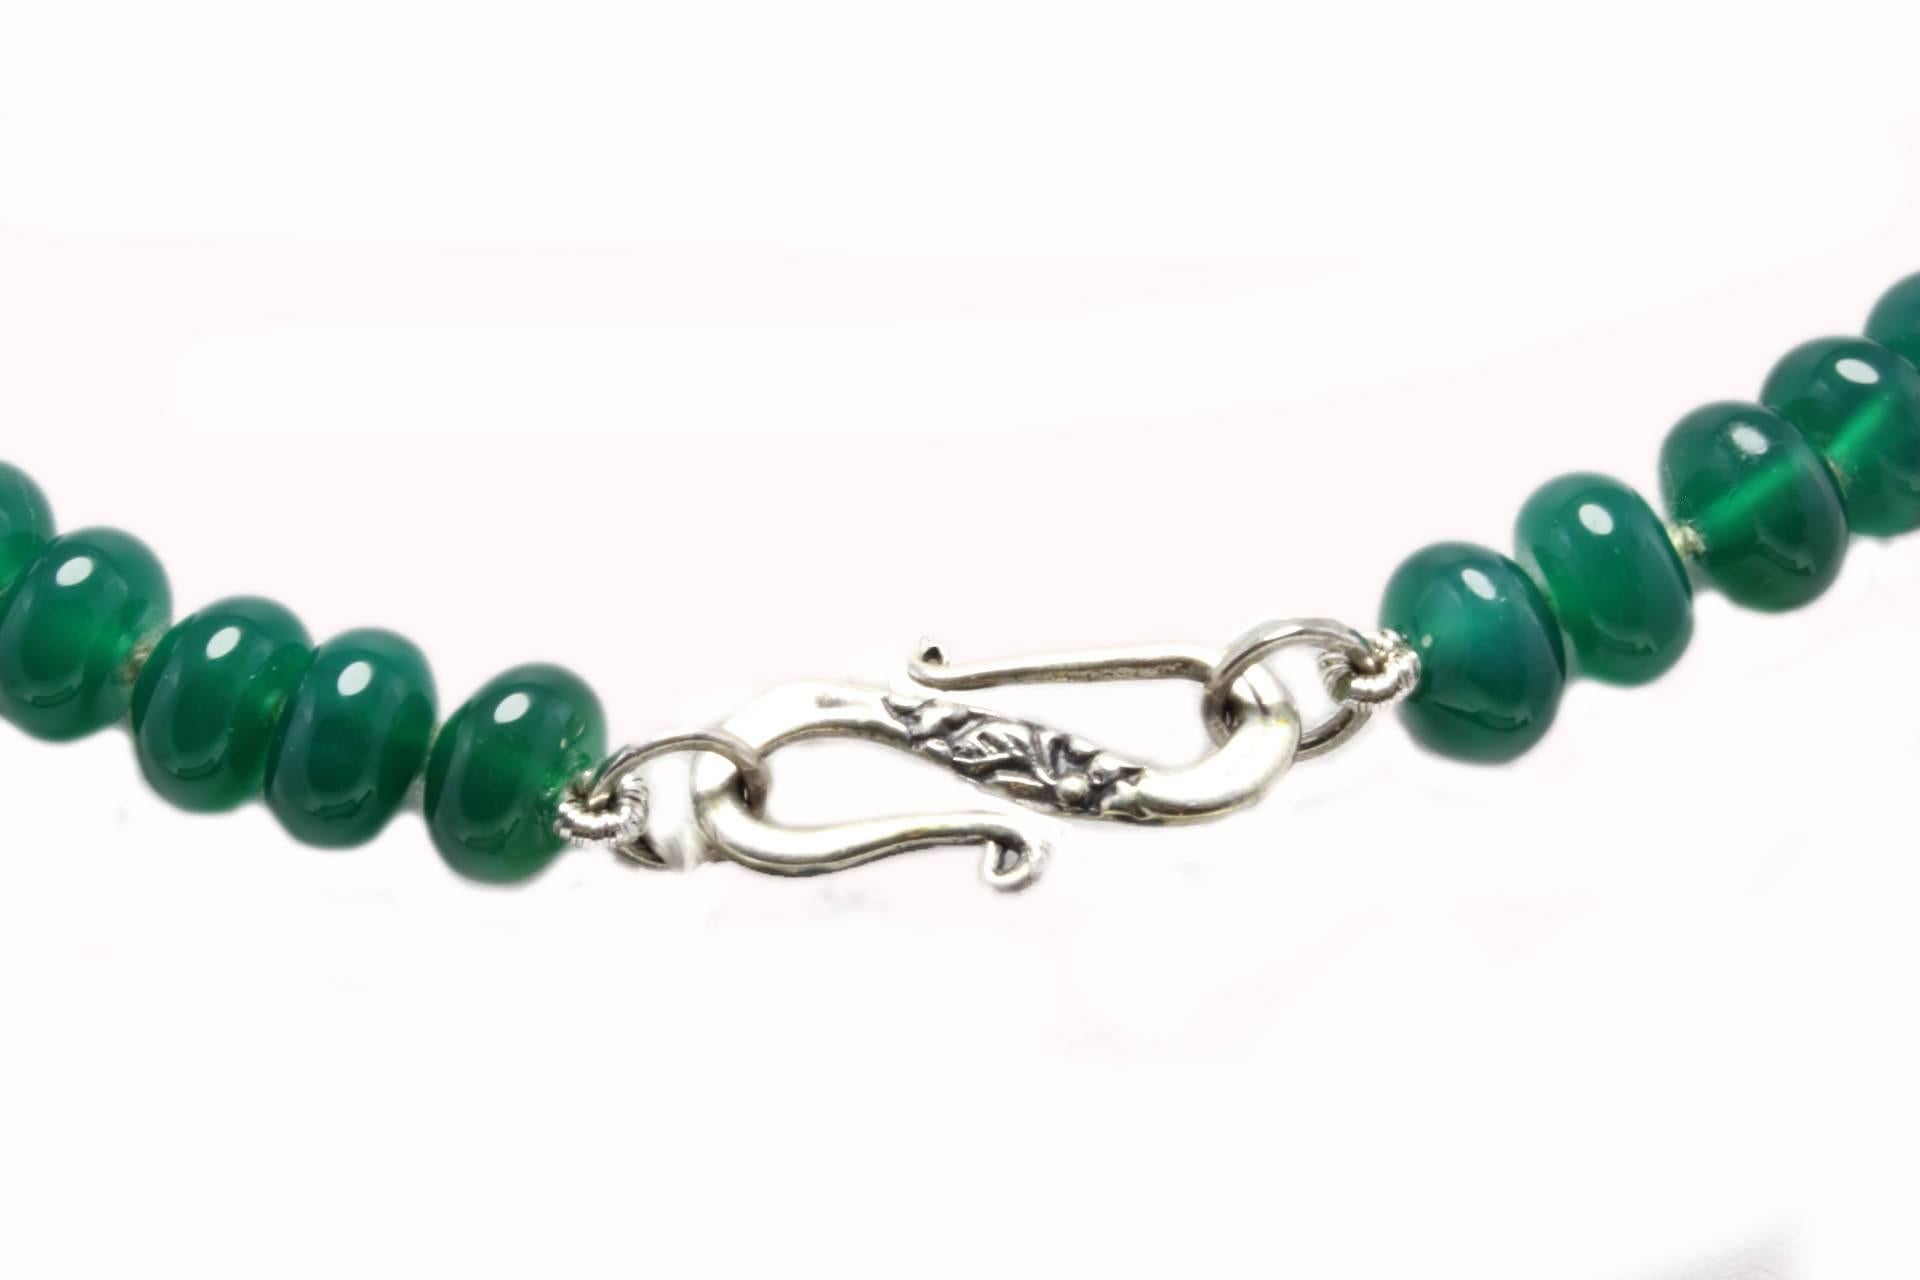 

This classic necklace is composed of a single strand of 42.80 g of green agate with silver hook shape clasp.
Green Agate 42.80 g 
Tot weight 44.1 g
R.F + uuc 
For any enquires, please contact the seller through the message center.